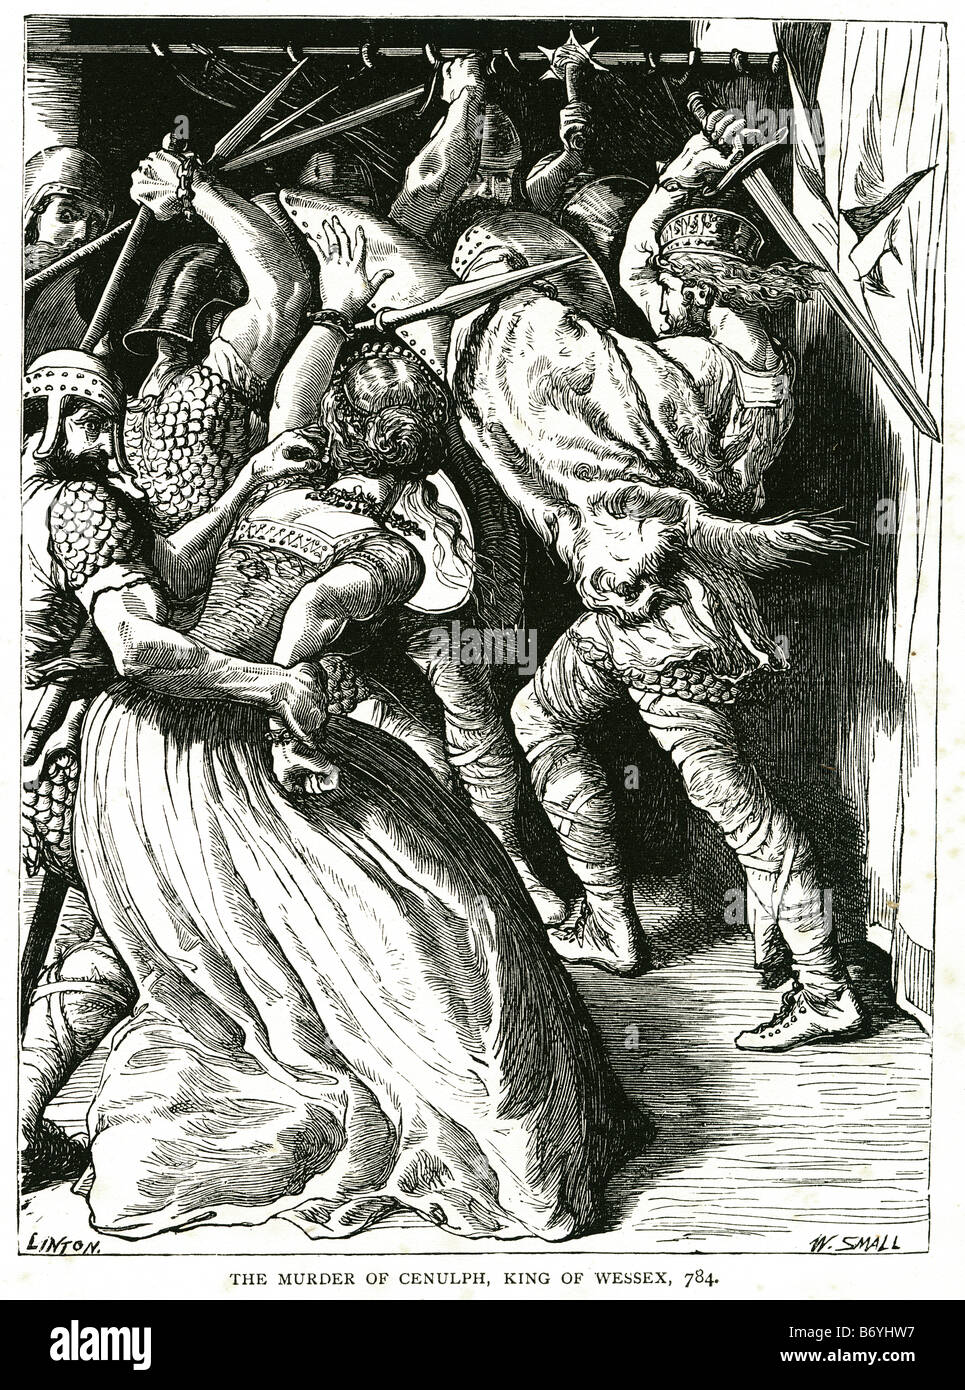 the murder of cenulph king of wessex 784 fight traditional clothing soilder solders uprising treachery period dress Stock Photo